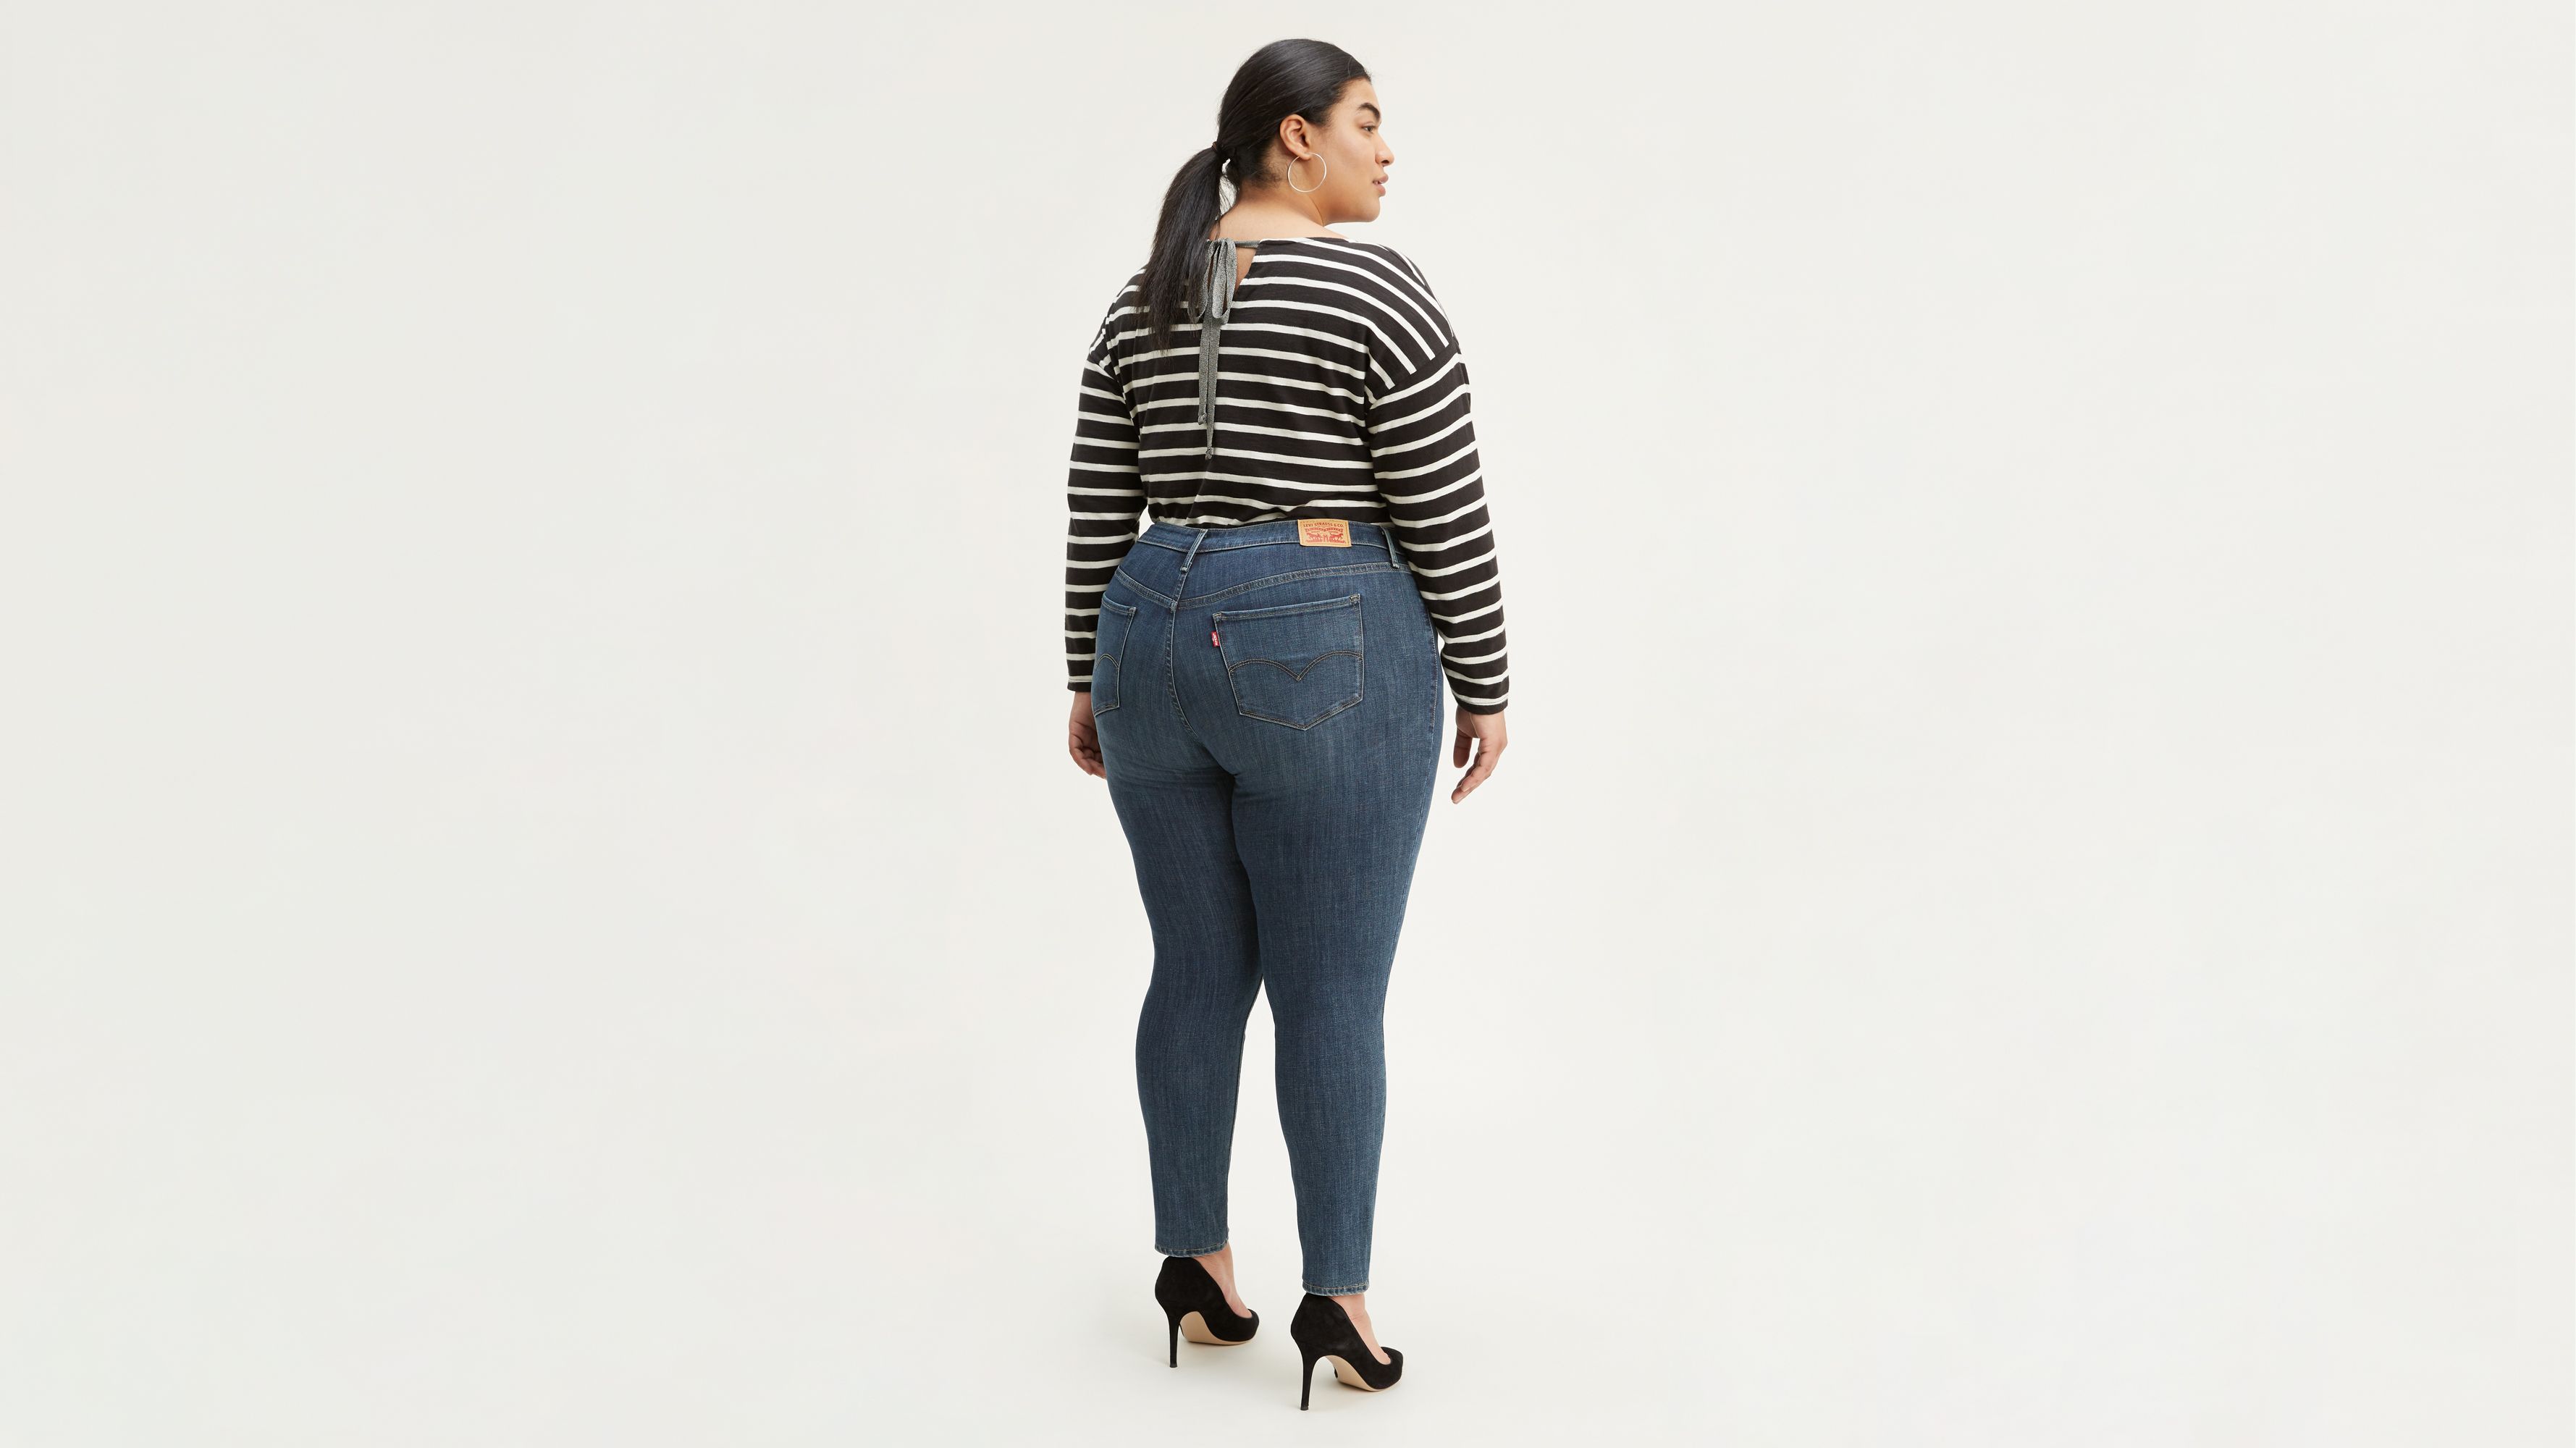 levis 310 shaping super skinny